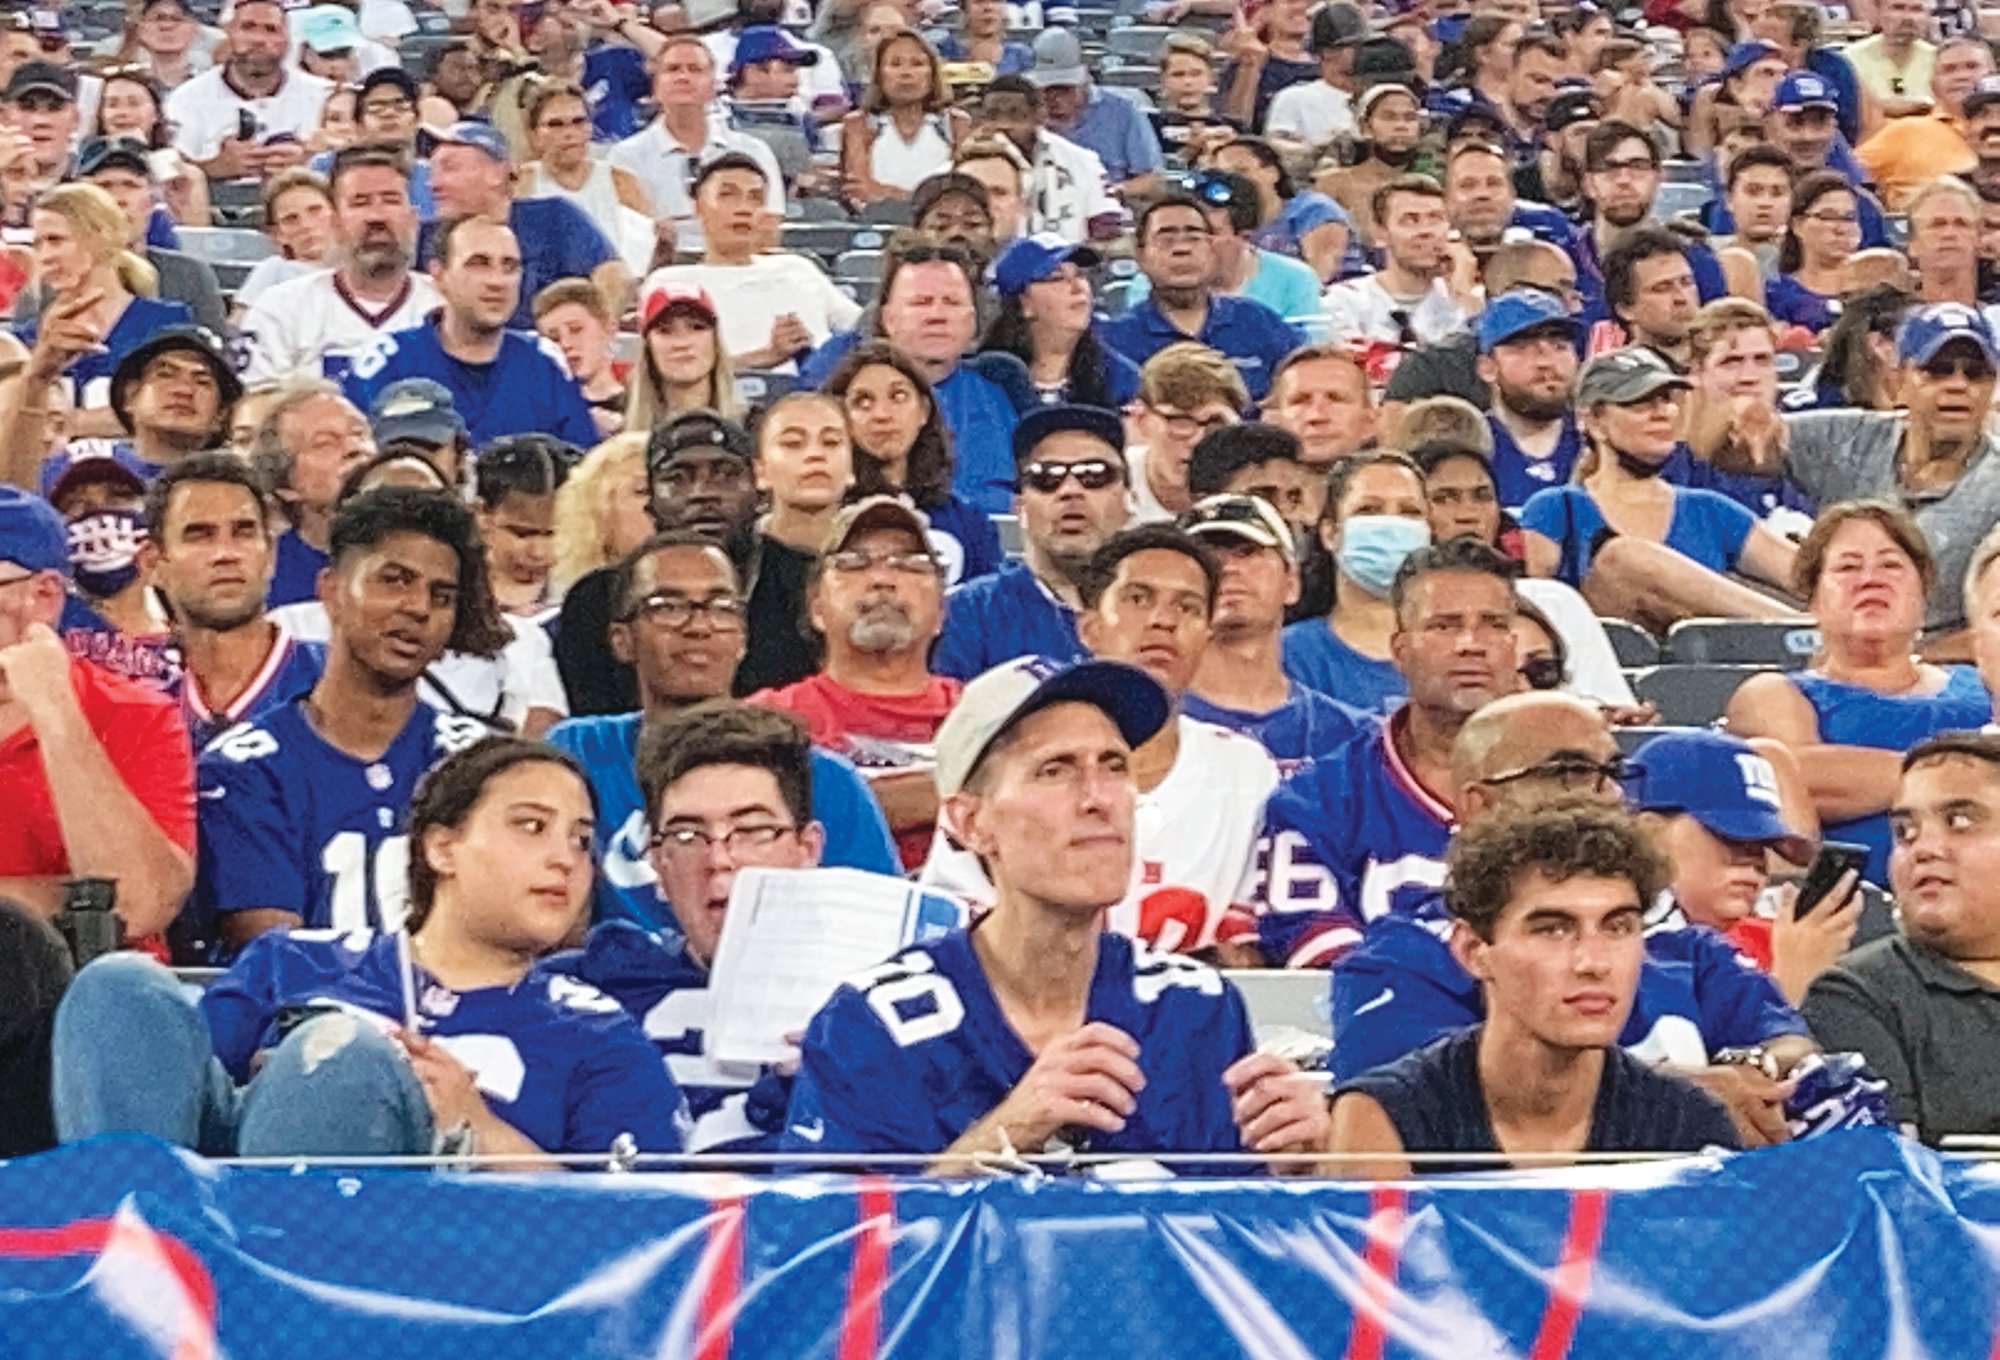 Fans attend the New York Giants' NFL football practice at MetLife Stadium on Wednesday in East Rutherford, New Jersey.